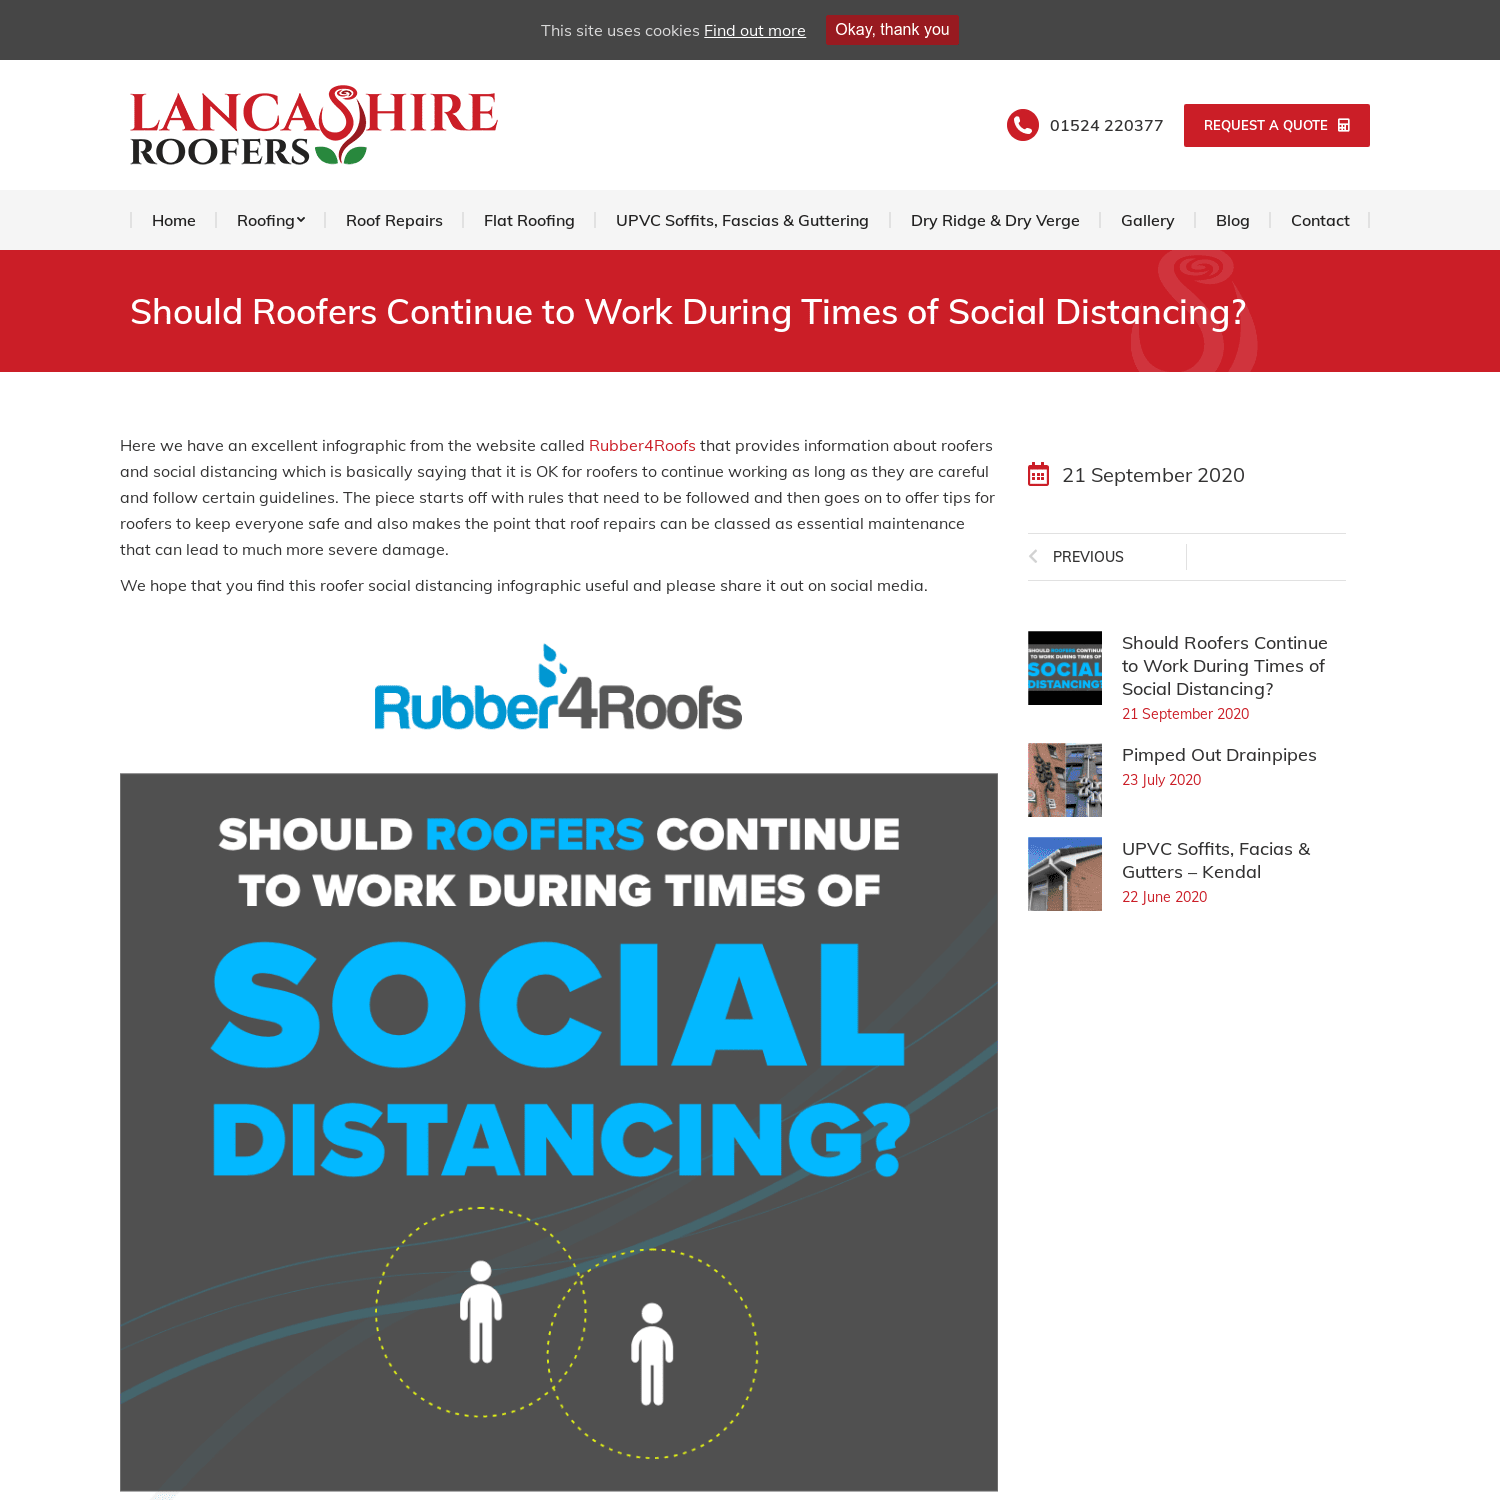 Should Roofers Continue to Work During Times of Social Distancing? (Infographic)